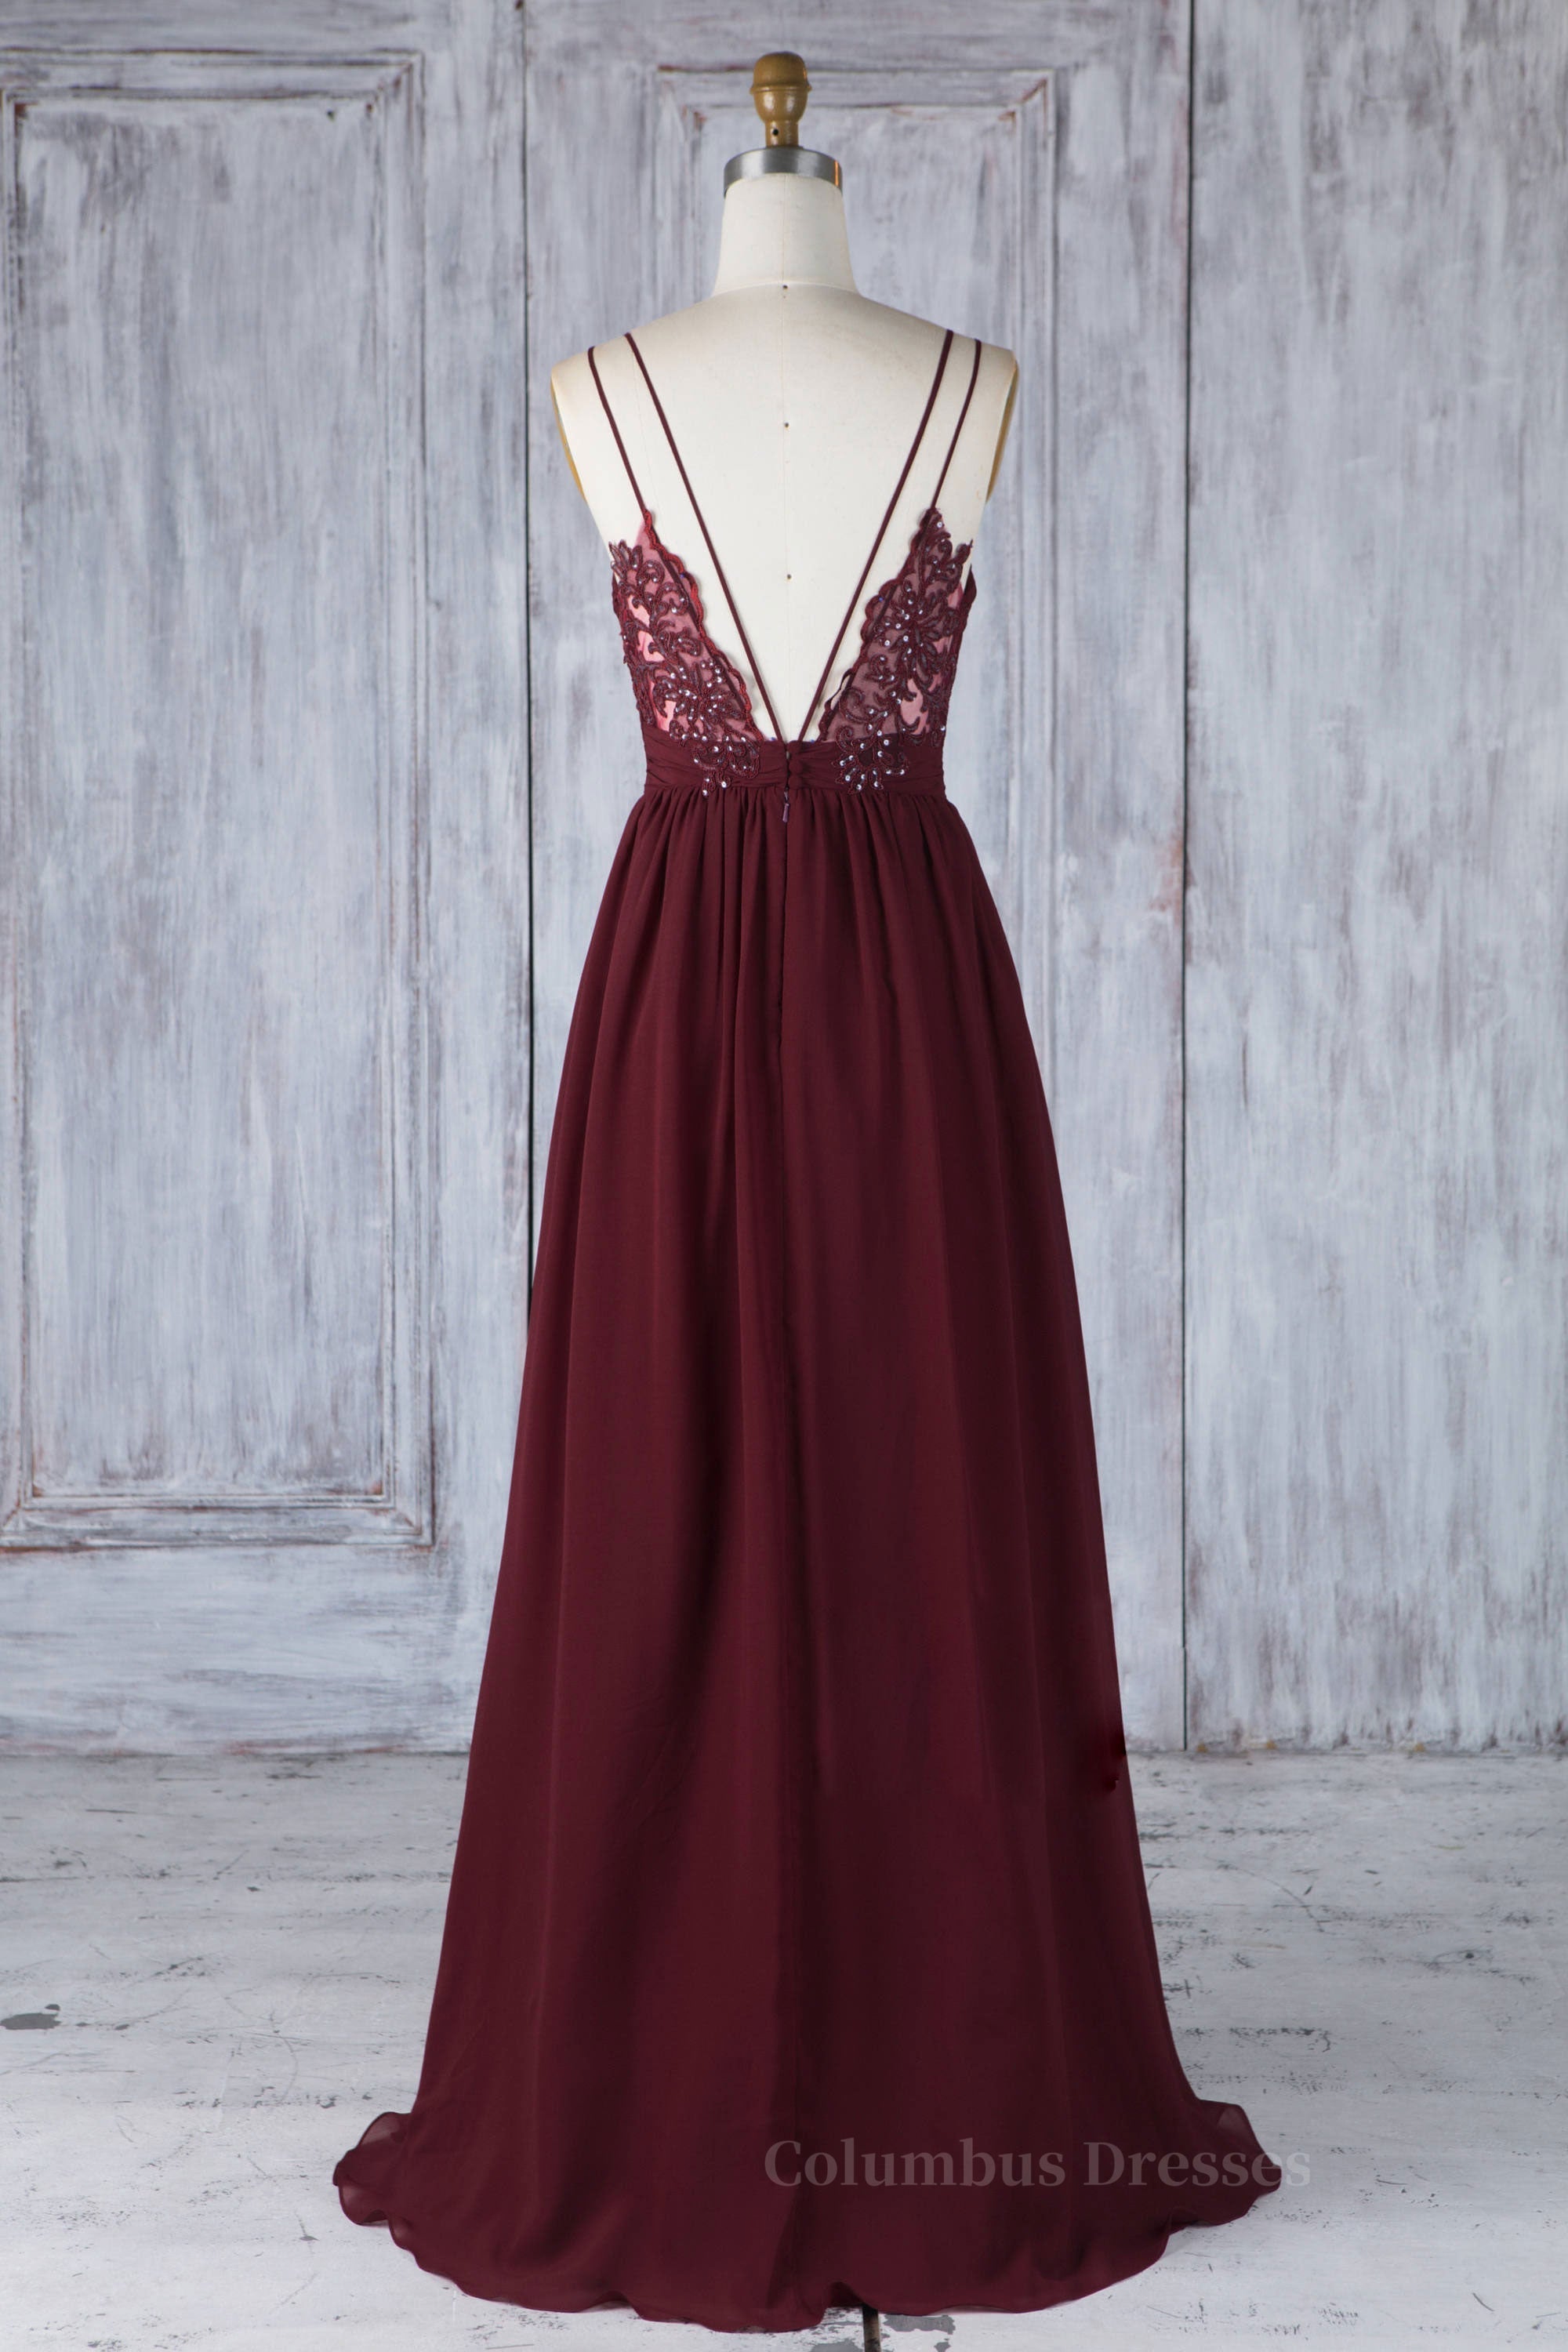 Prom Dresses 2019, Burgundy tulle lace long prom dress burgundy lace evening dress